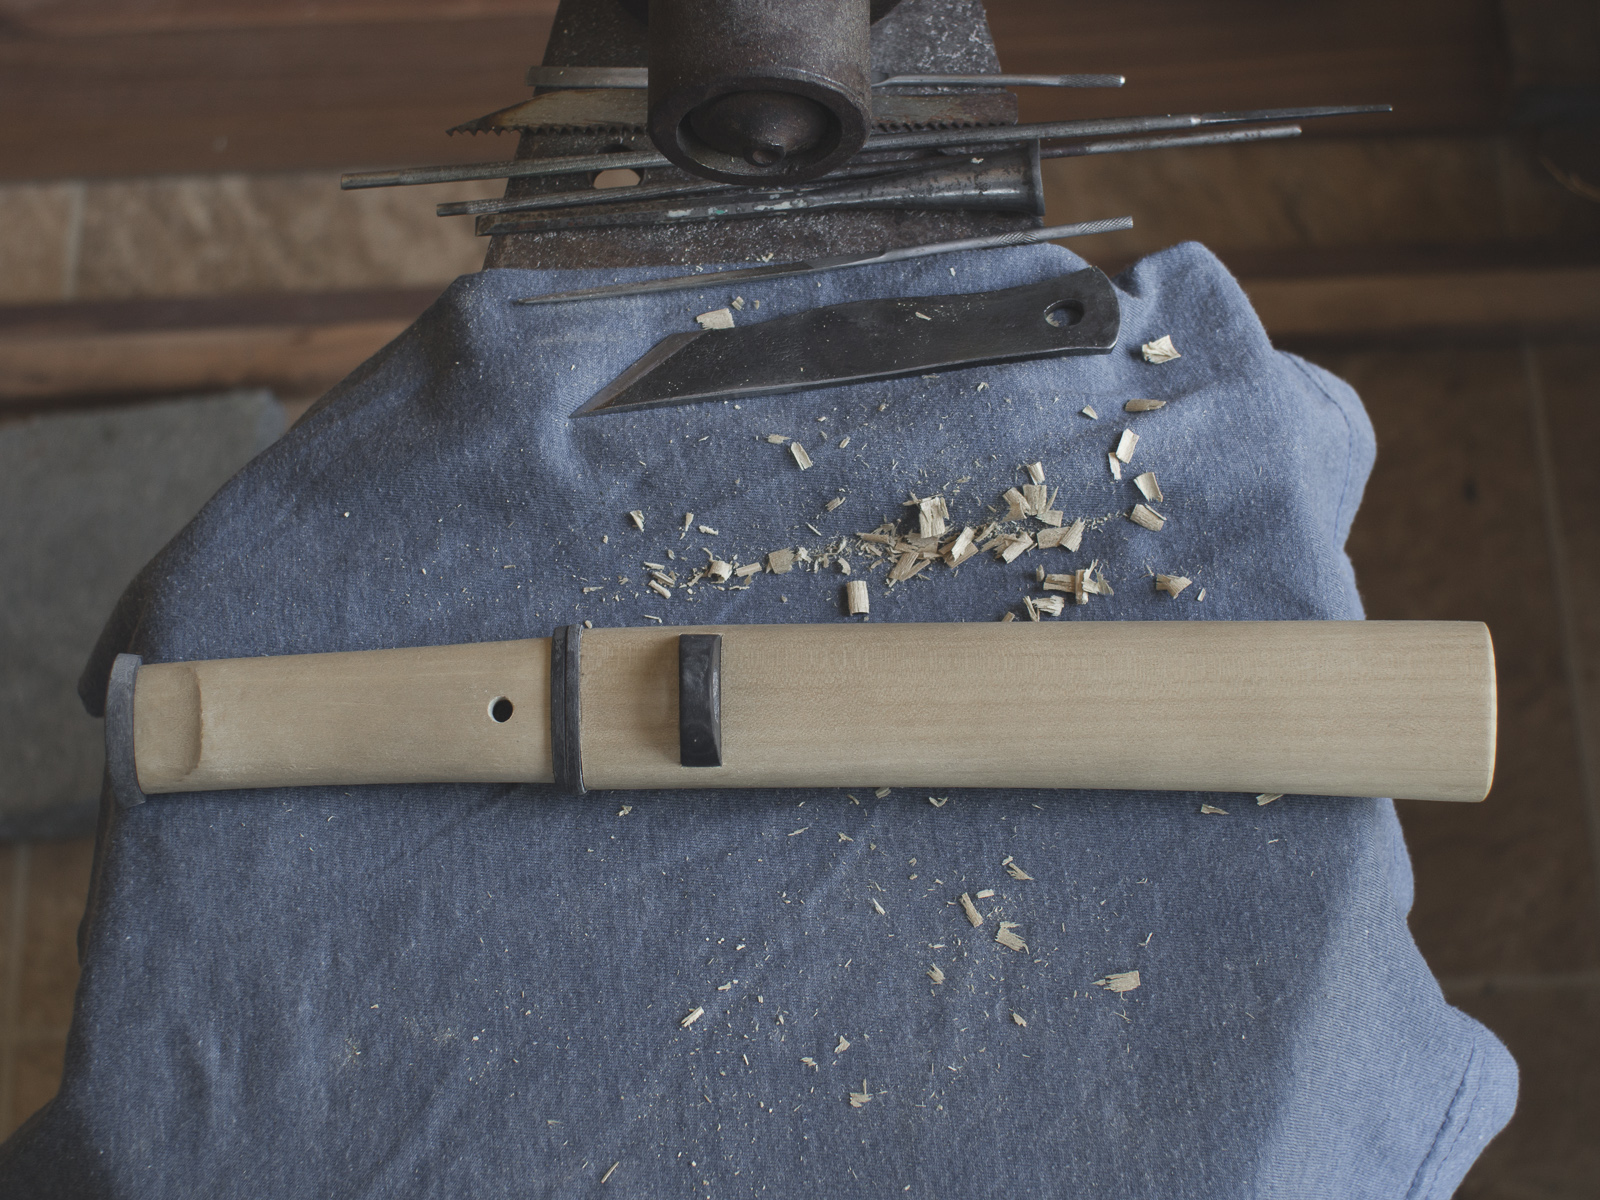 Island Blacksmith: Hand crafted tanto made from reclaimed and natural materials using traditional techniques